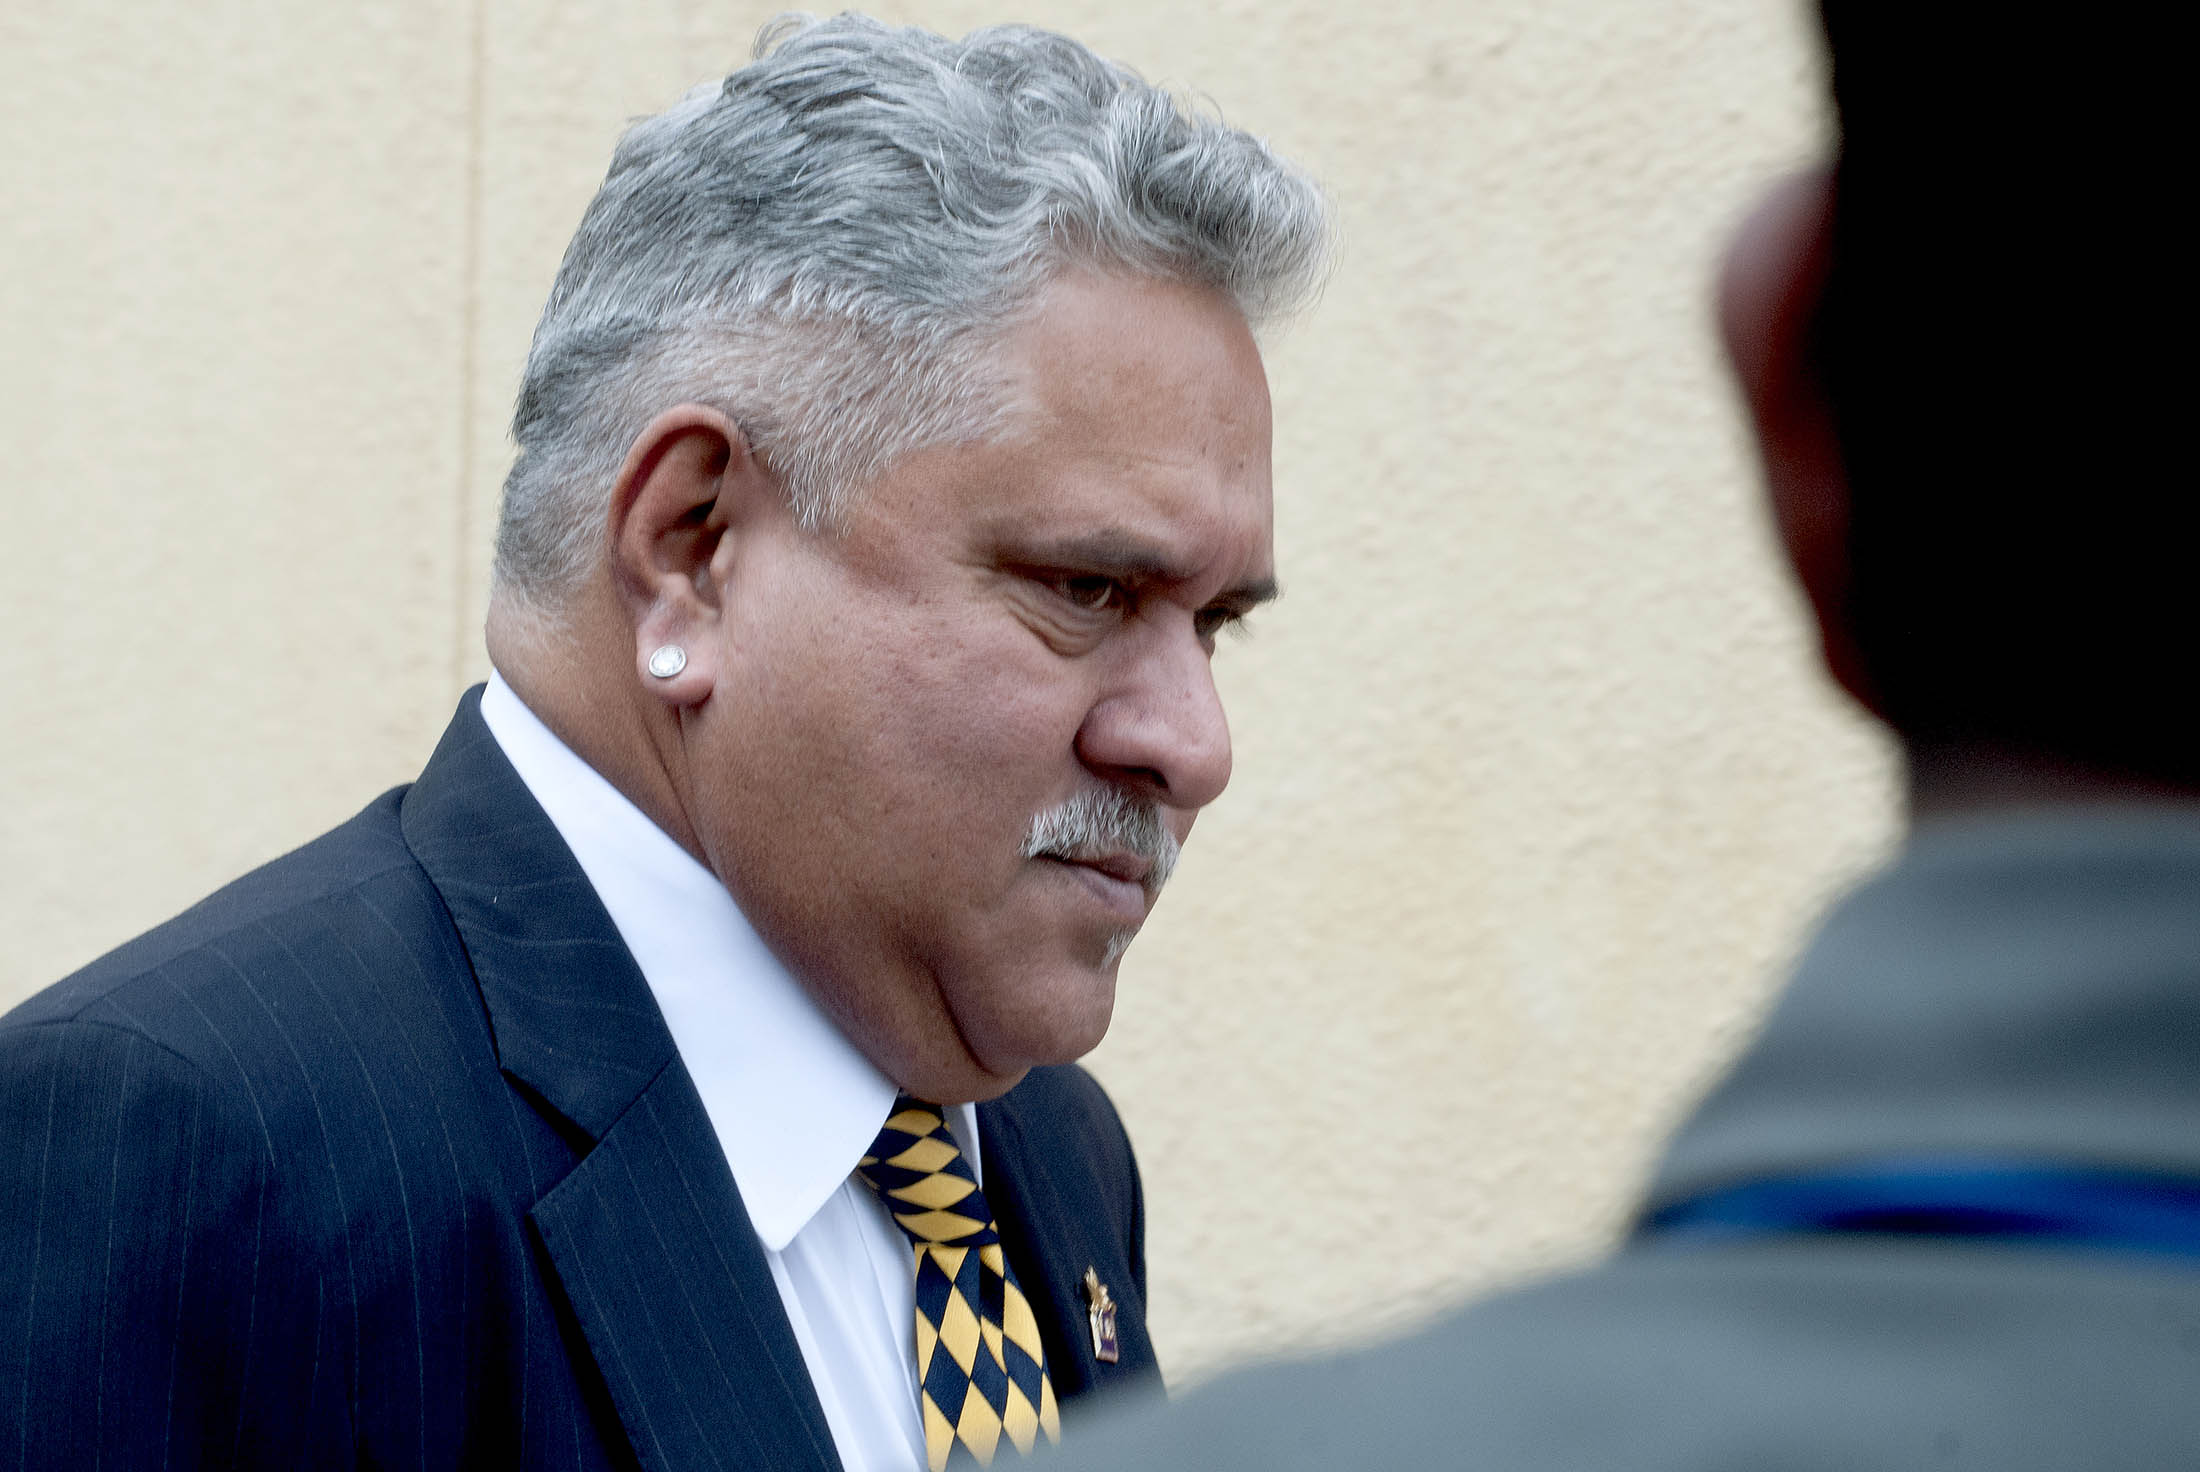 Vijay Mallya in talks to return to India voluntarily: Sources | India News  - Times of India